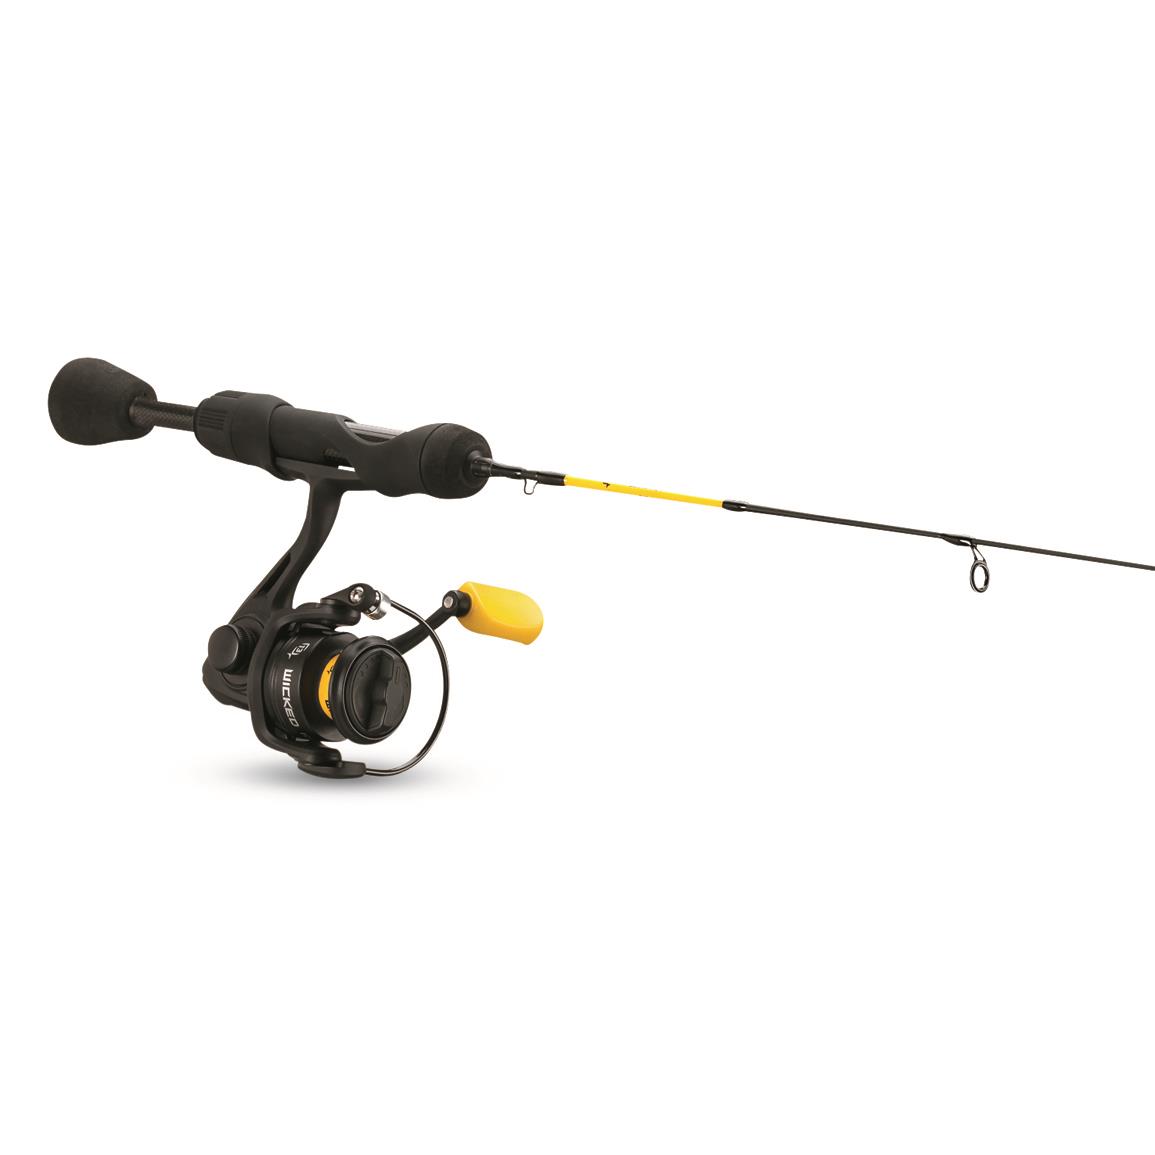 13 Fishing Snitch Pro Ice Fishing Spinning Rod and Reel Combo, 23 Length,  Quick Tip - 728910, Ice Fishing Combos at Sportsman's Guide